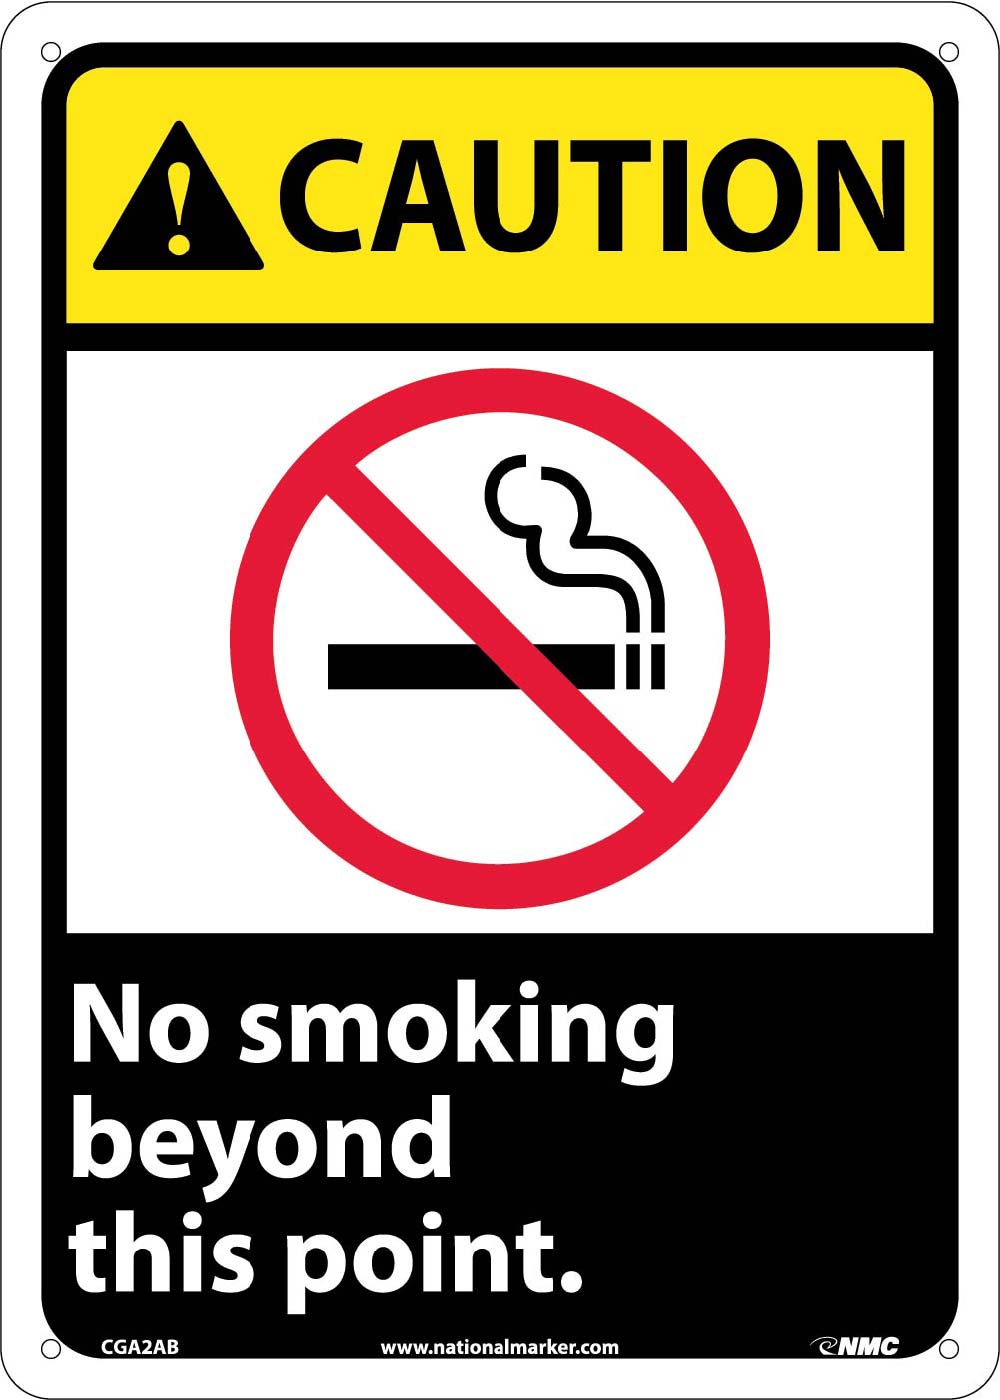 Caution No Smoking Beyond This Point Sign-eSafety Supplies, Inc